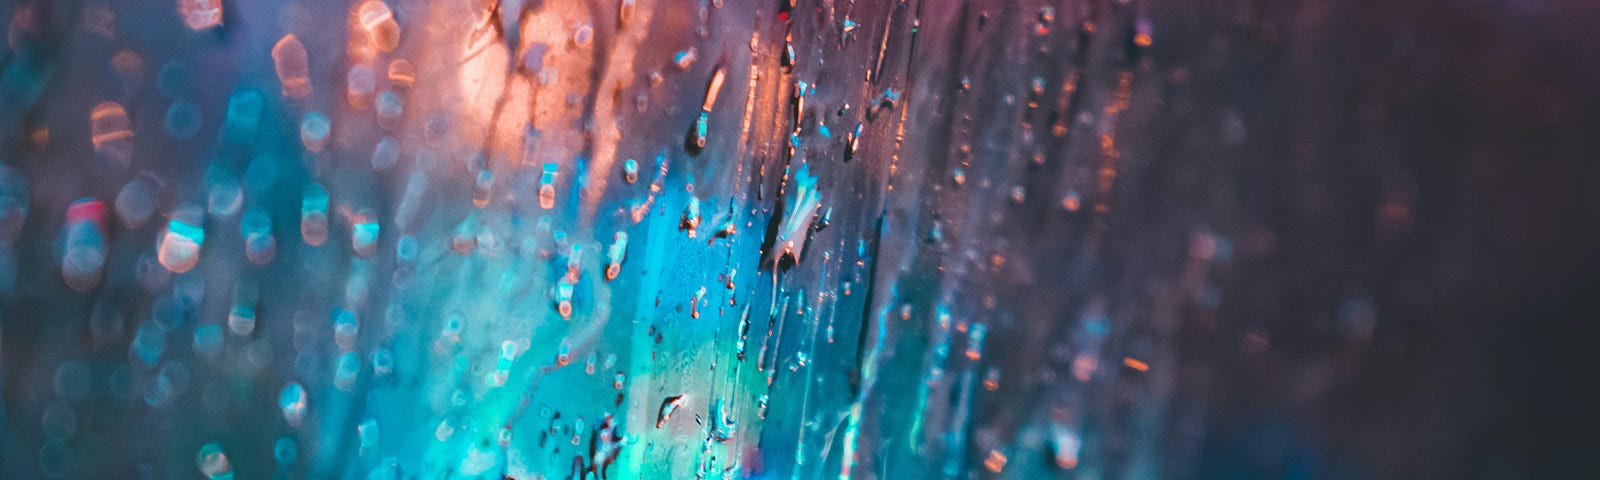 Blue and pink lights are seen behind a fogged-up window with water droplets and condensation on it.